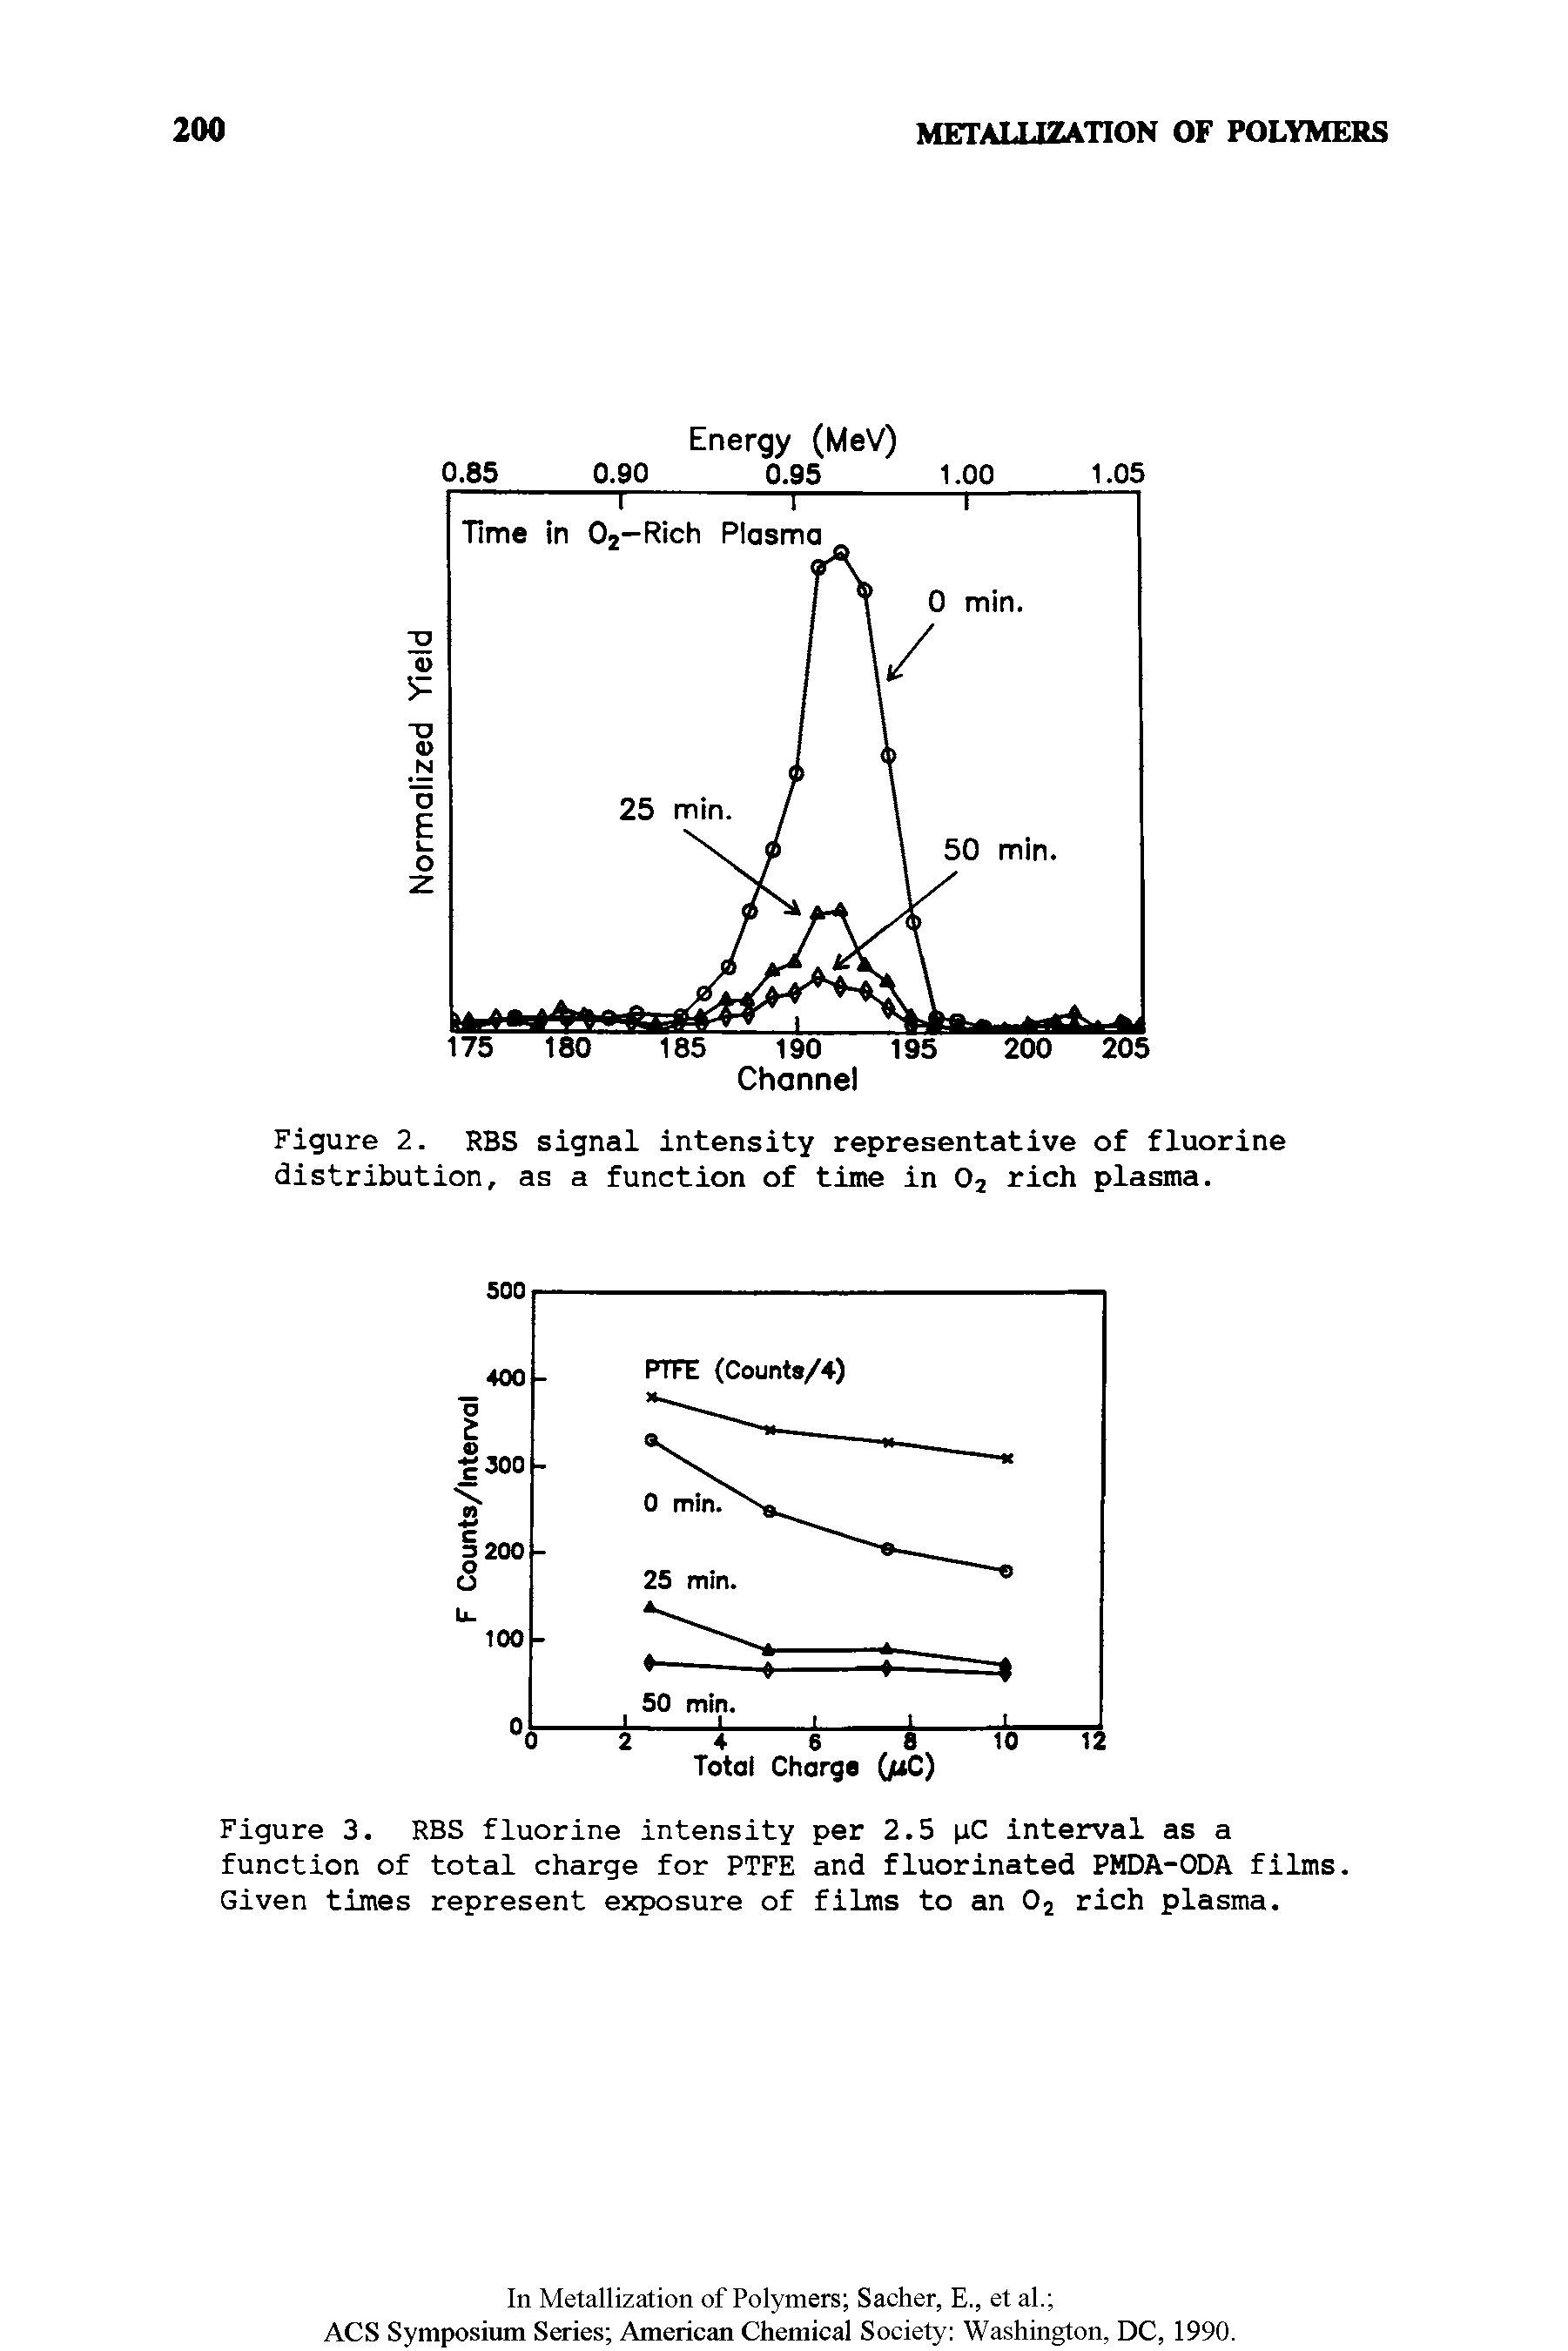 Figure 3. RBS fluorine intensity per 2.5 nC interval as a function of total charge for PTFE and fluorinated PMDA-ODA films. Given times represent exposure of films to an 02 rich plasma.